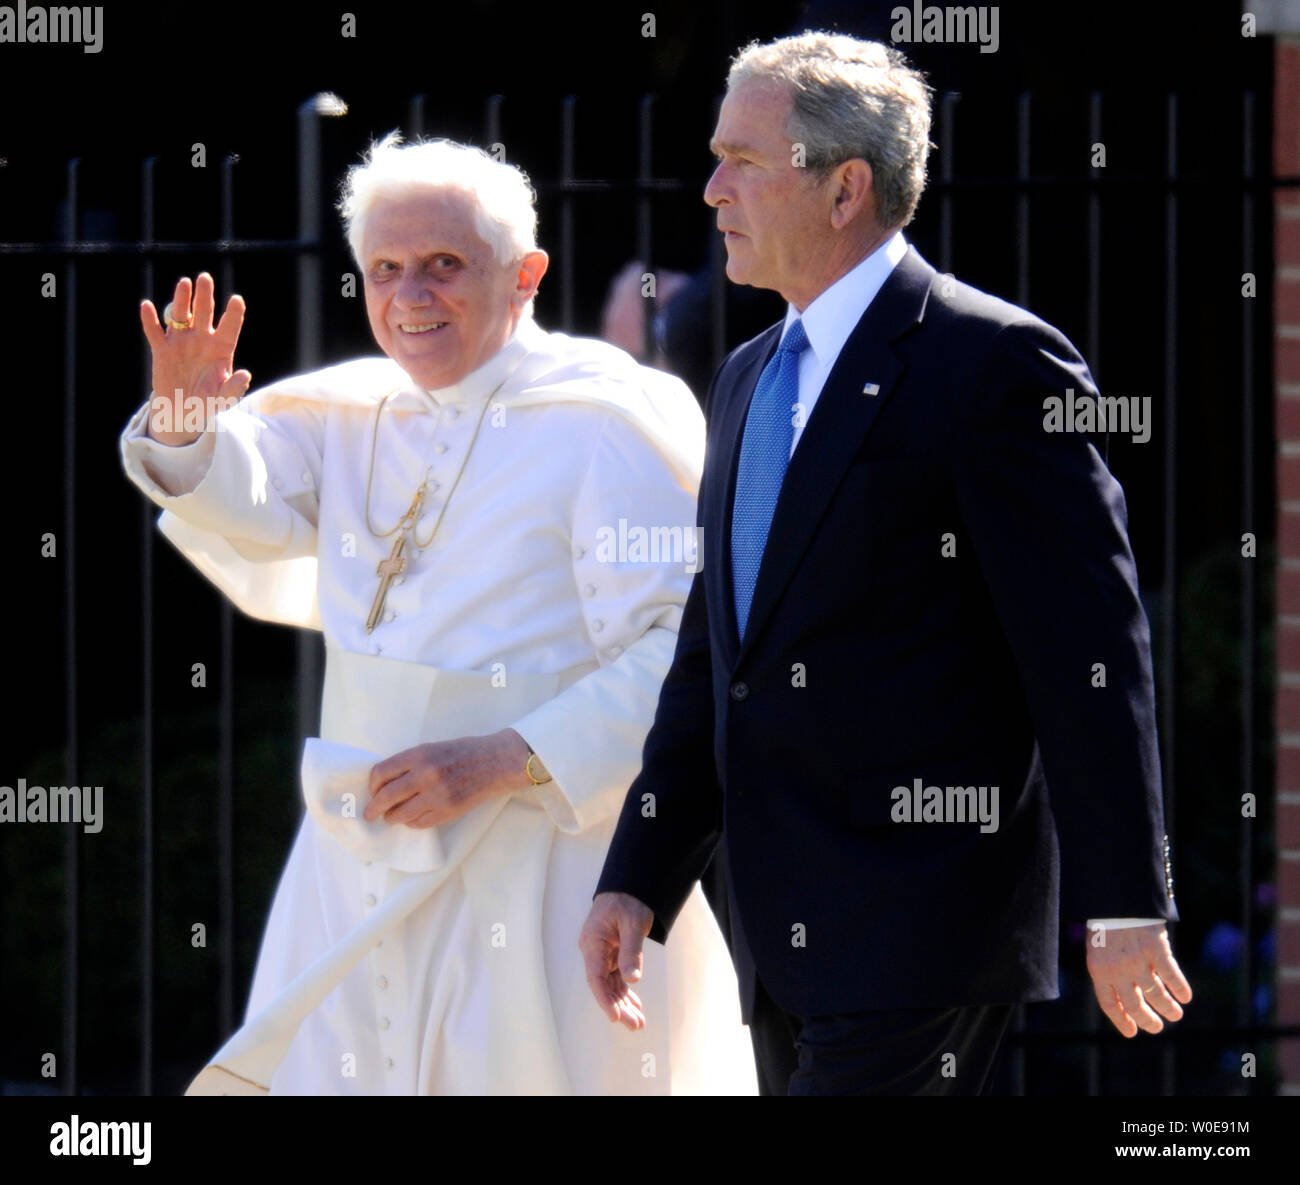 U.S. President George W. Bush walks with Pope Benedict XVI after the Pope arrived on his first visit to the United States at Andrew Air Force base outside of Washington on April 15, 2008. (UPI Photo/Kevin Dietsch) Stock Photo